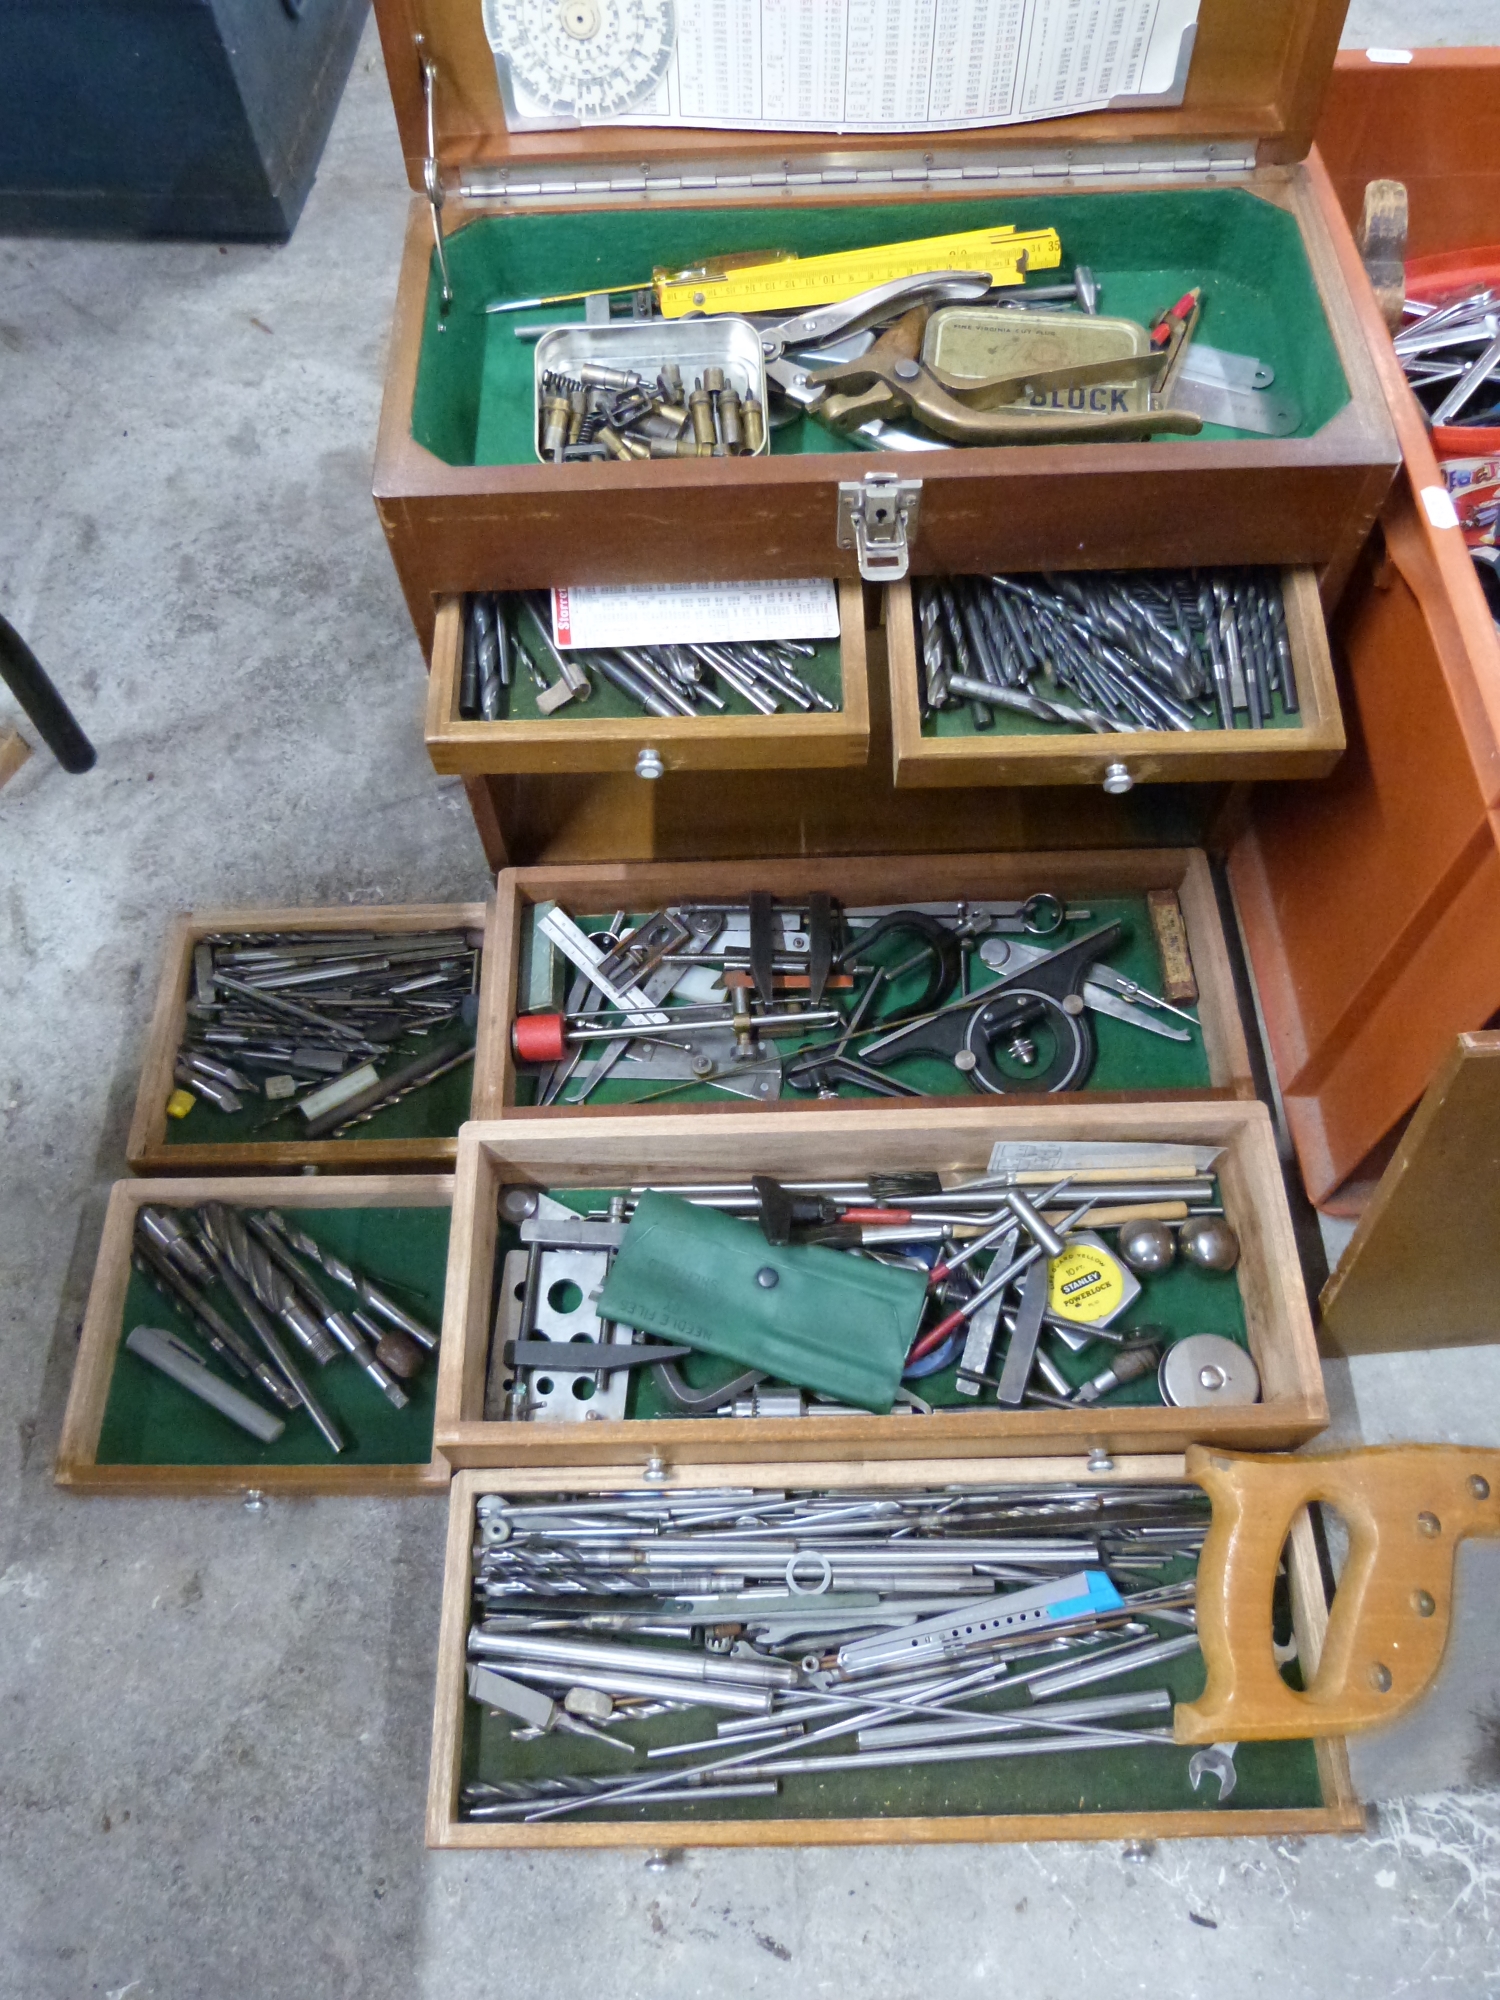 An engineer's tool chest and tools to include drills, bits, clamps, steel rods, - Image 2 of 3